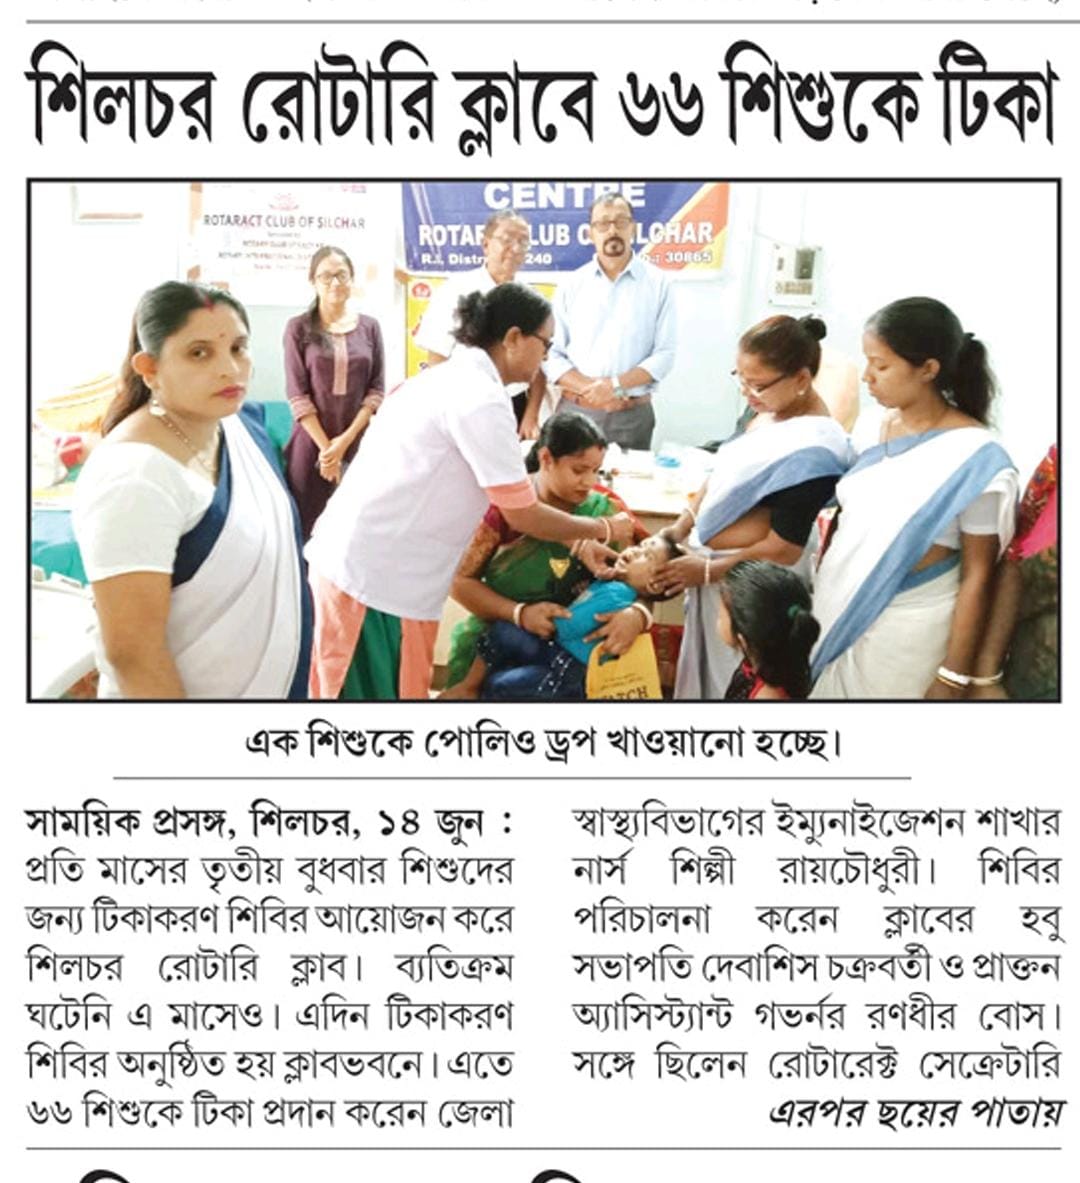 Rotary Routine Immunisation Centre by Rotary Club of Silchar